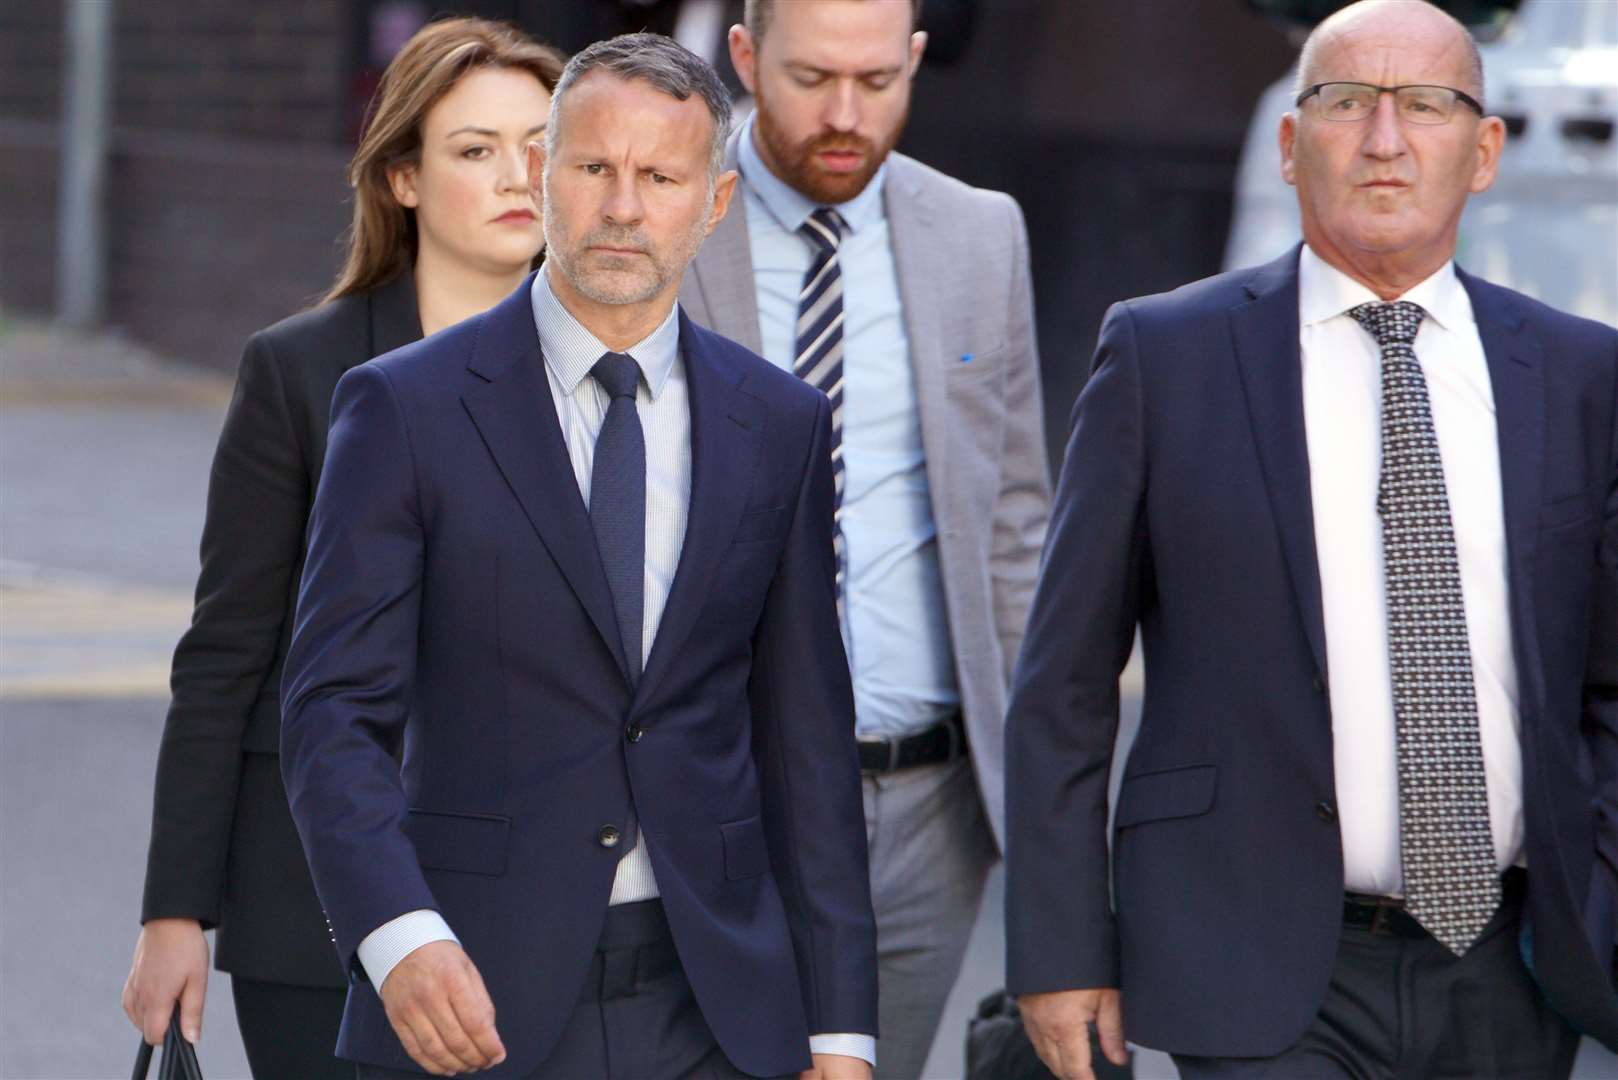 Ryan Giggs arrives at Manchester Crown Court (Peter Byrne/PA)